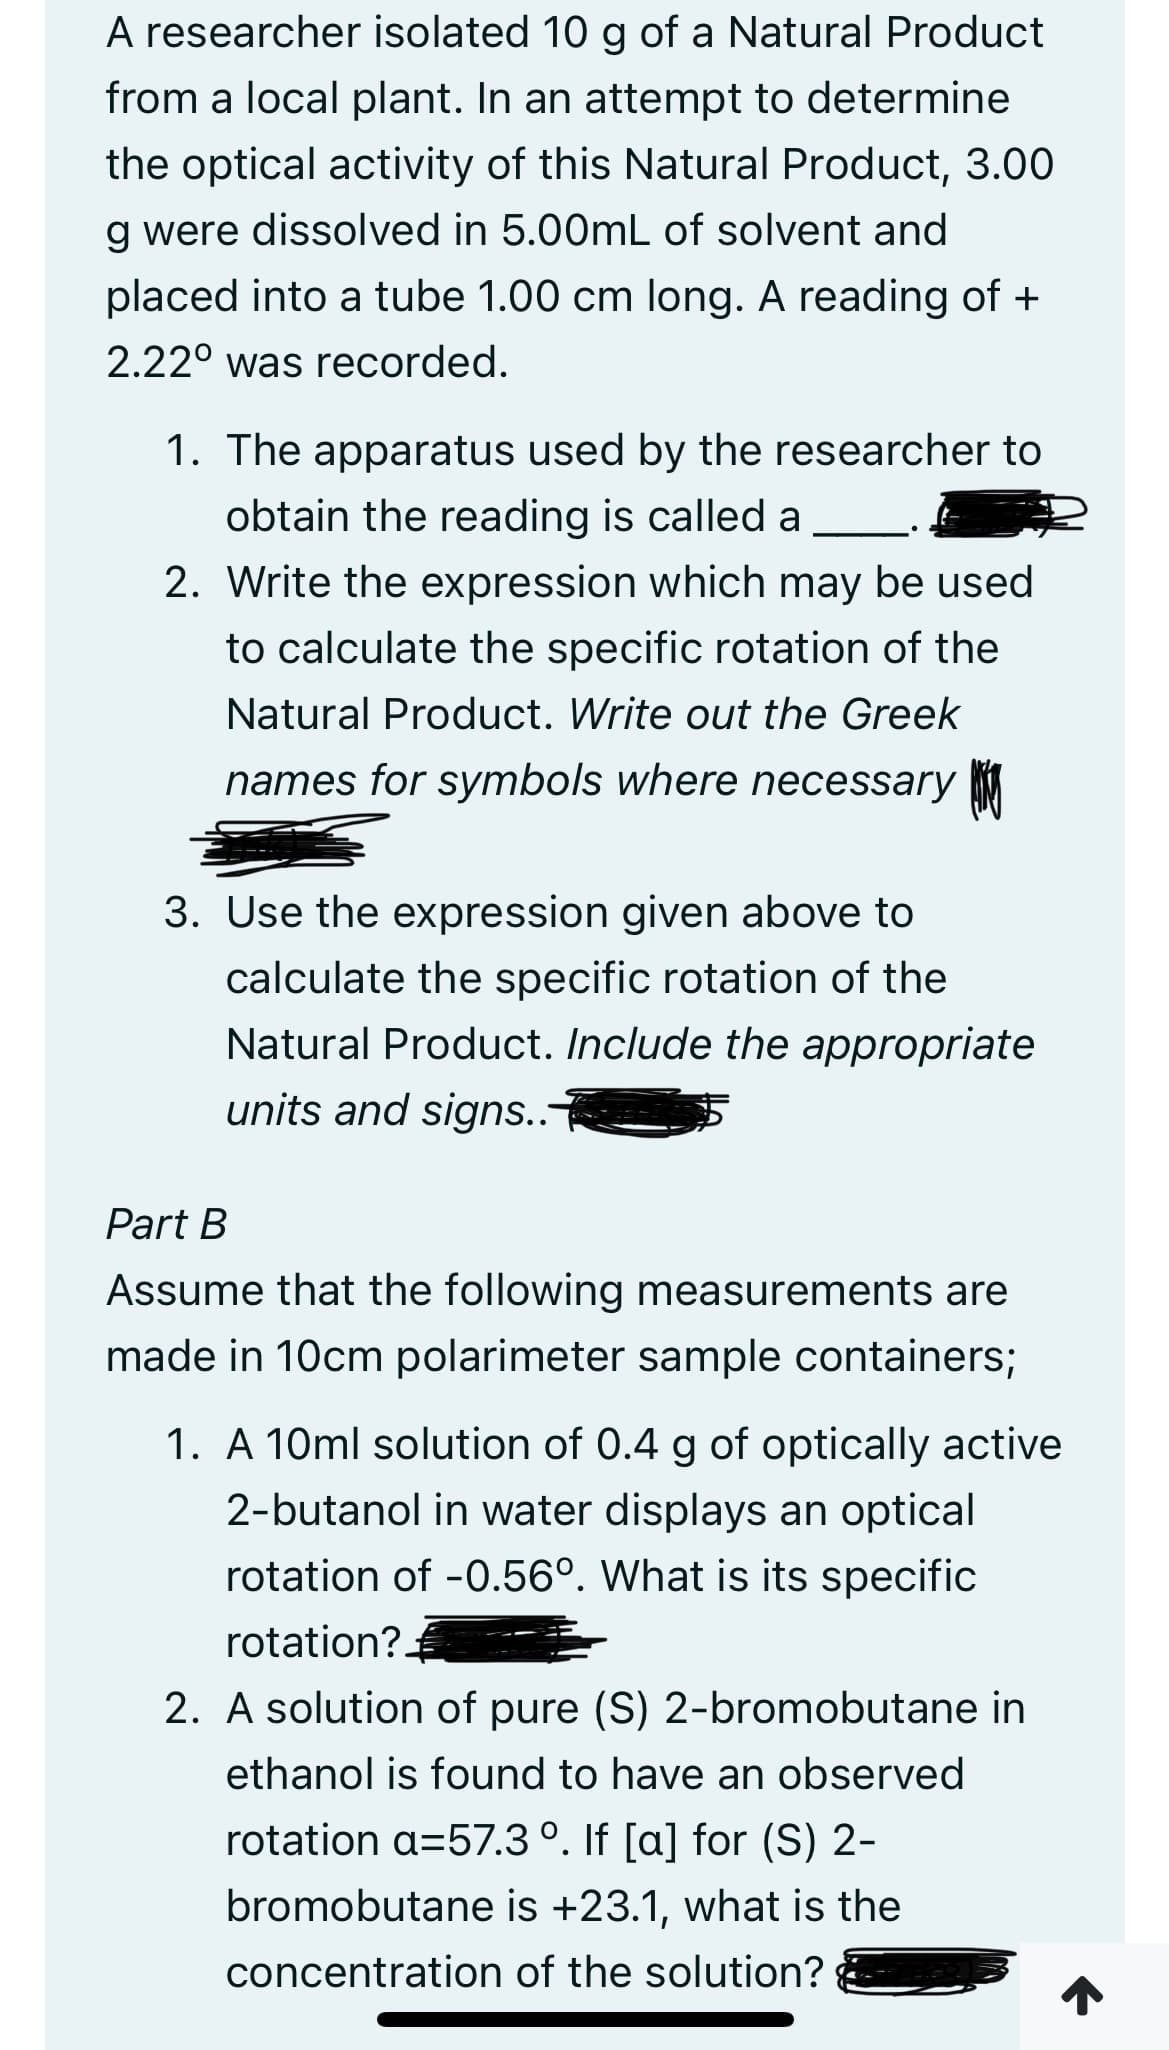 A researcher isolated 10 g of a Natural Product
from a local plant. In an attempt to determine
the optical activity of this Natural Product, 3.00
g were dissolved in 5.00mL of solvent and
placed into a tube 1.00 cm long. A reading of +
2.22⁰ was recorded.
1. The apparatus used by the researcher to
obtain the reading is called a
2. Write the expression which may be used
to calculate the specific rotation of the
Natural Product. Write out the Greek
names for symbols where necessary
3. Use the expression given above to
calculate the specific rotation of the
Natural Product. Include the appropriate
units and signs..
Part B
Assume that the following measurements are
made in 10cm polarimeter sample containers;
1. A 10ml solution of 0.4 g of optically active
2-butanol in water displays an optical
rotation of -0.56°. What is its specific
rotation?
2. A solution of pure (S) 2-bromobutane in
ethanol is found to have an observed
rotation a=57.3 °. If [a] for (S) 2-
bromobutane is +23.1, what is the
concentration of the solution?
↑